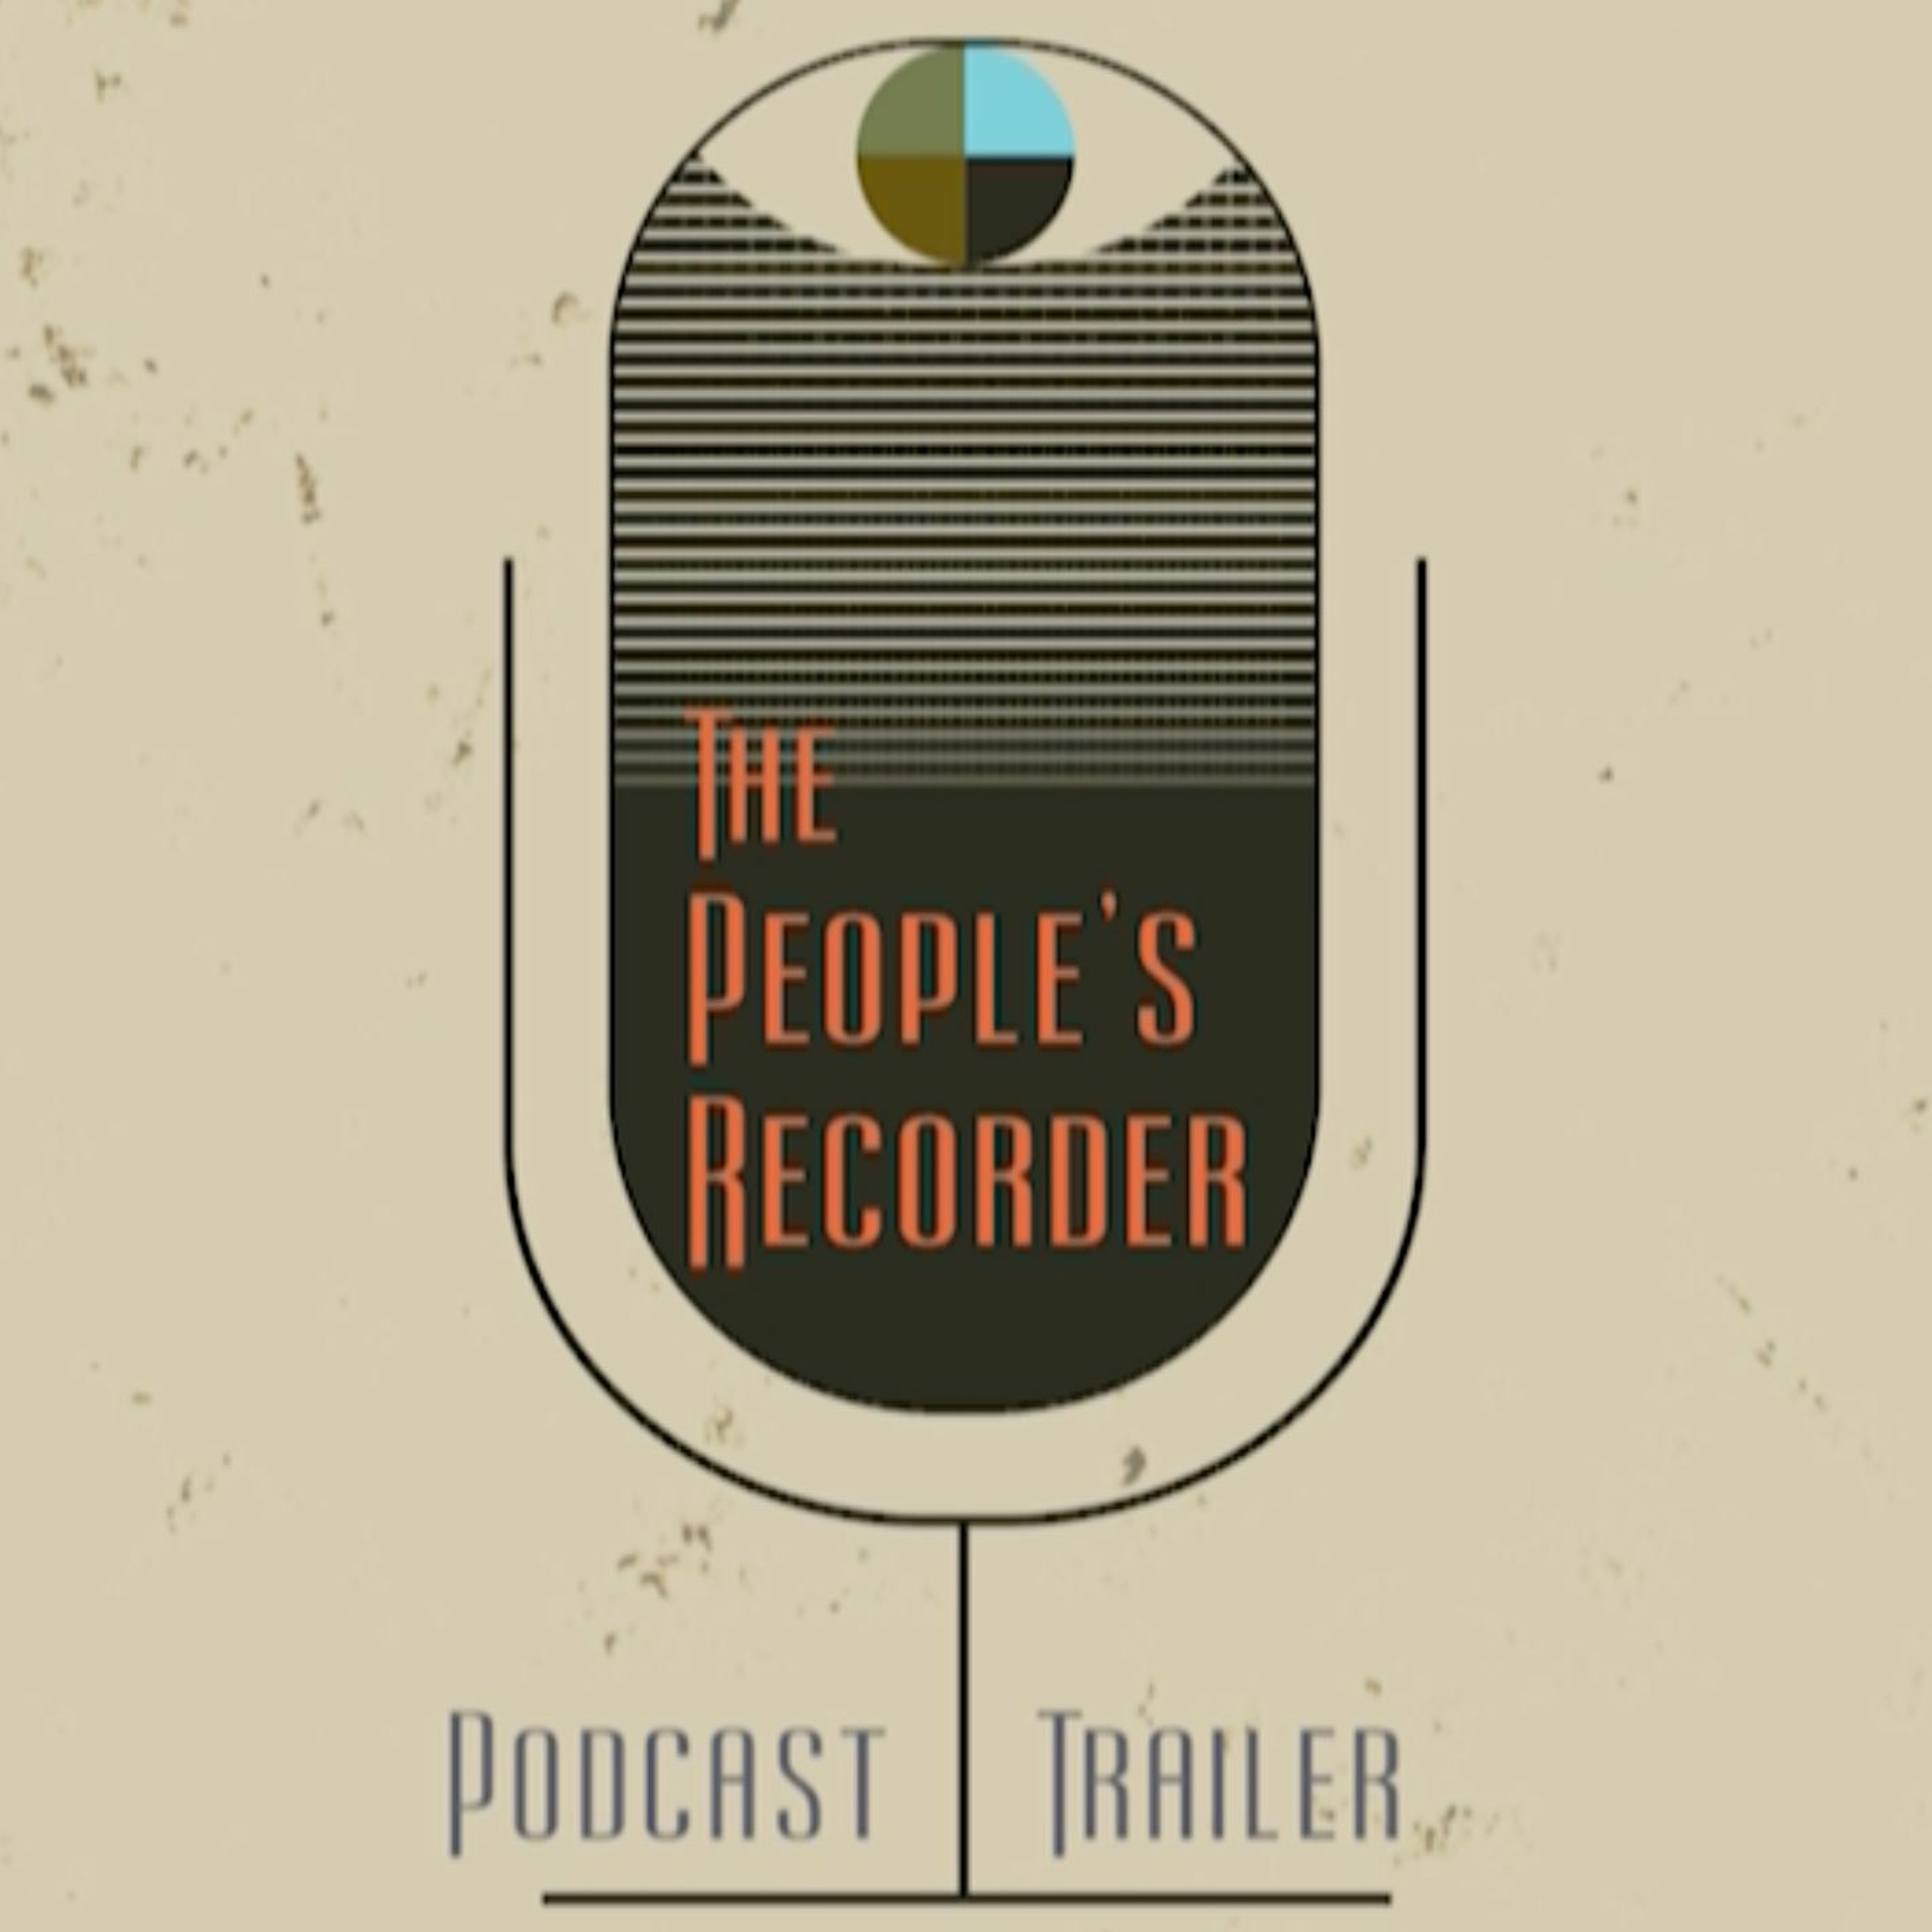 TRAILER: The Peoples Recorder